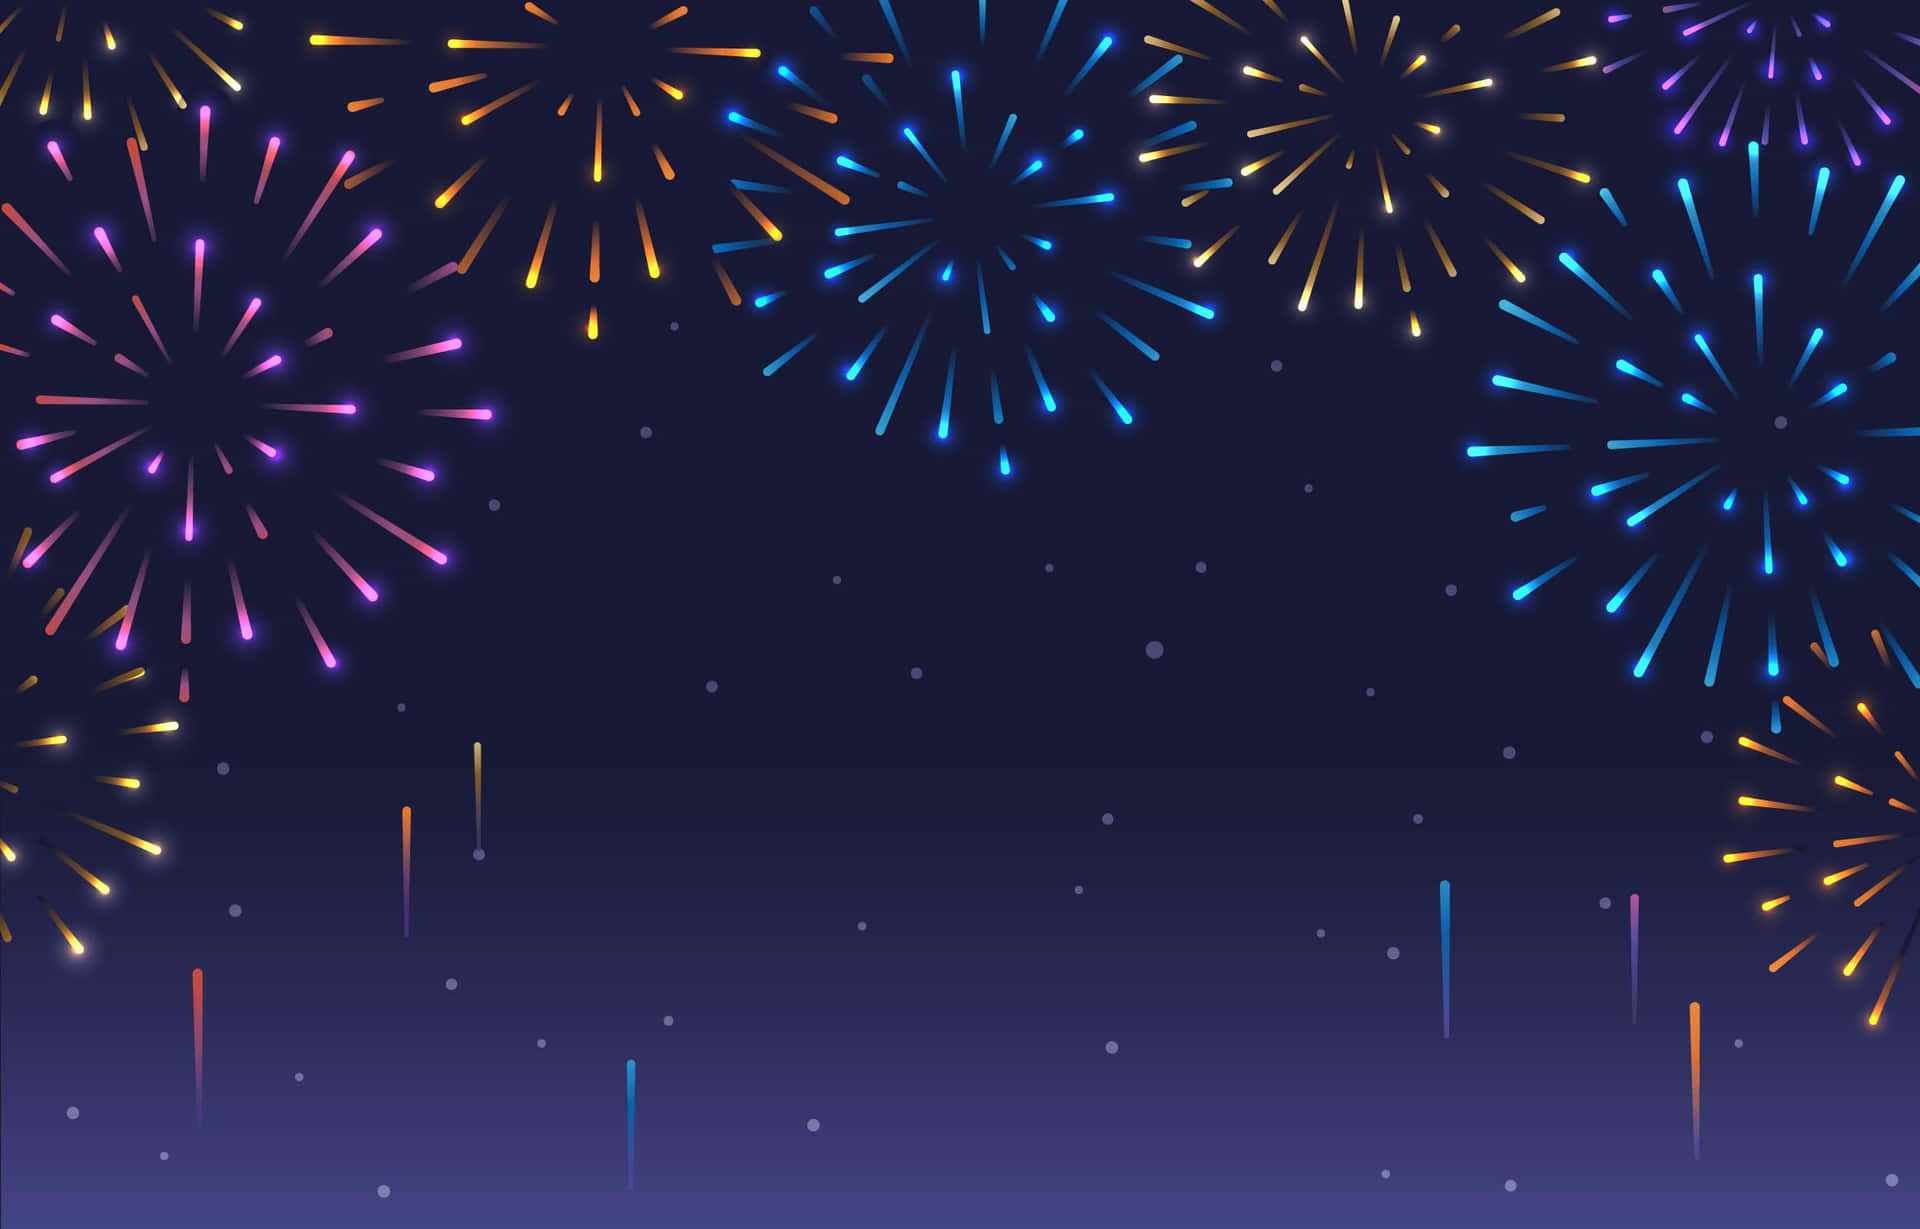 The beauty of a night sky filled with vibrant, shining fireworks.